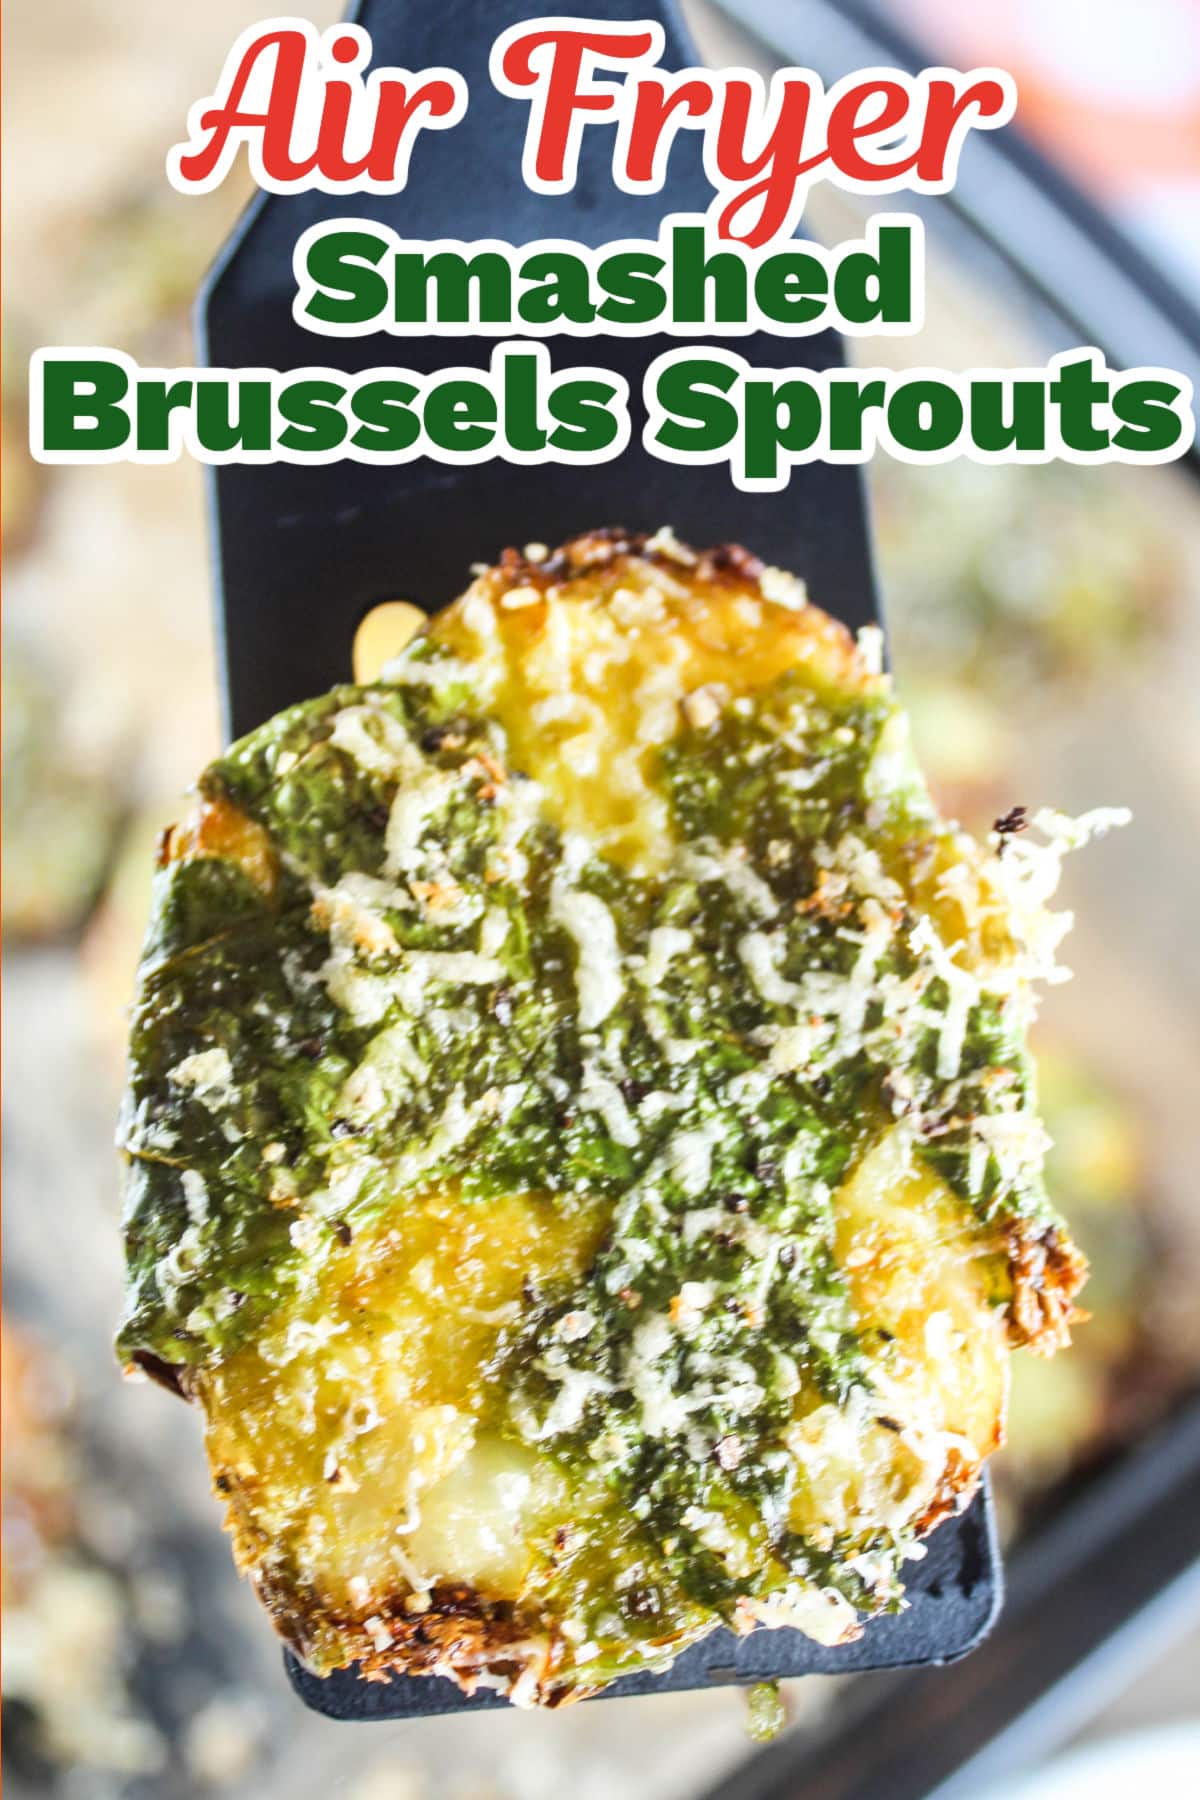 This delicious recipe for Air Fryer Smashed Brussels Sprouts is the perfect side dish for any meal! Steamed, smashed and air fried - then sprinkled with Parmesan cheese, olive oil and garlic salt - this easy recipe for crispy Brussels sprouts only takes 15 minutes of cooking time! via @foodhussy